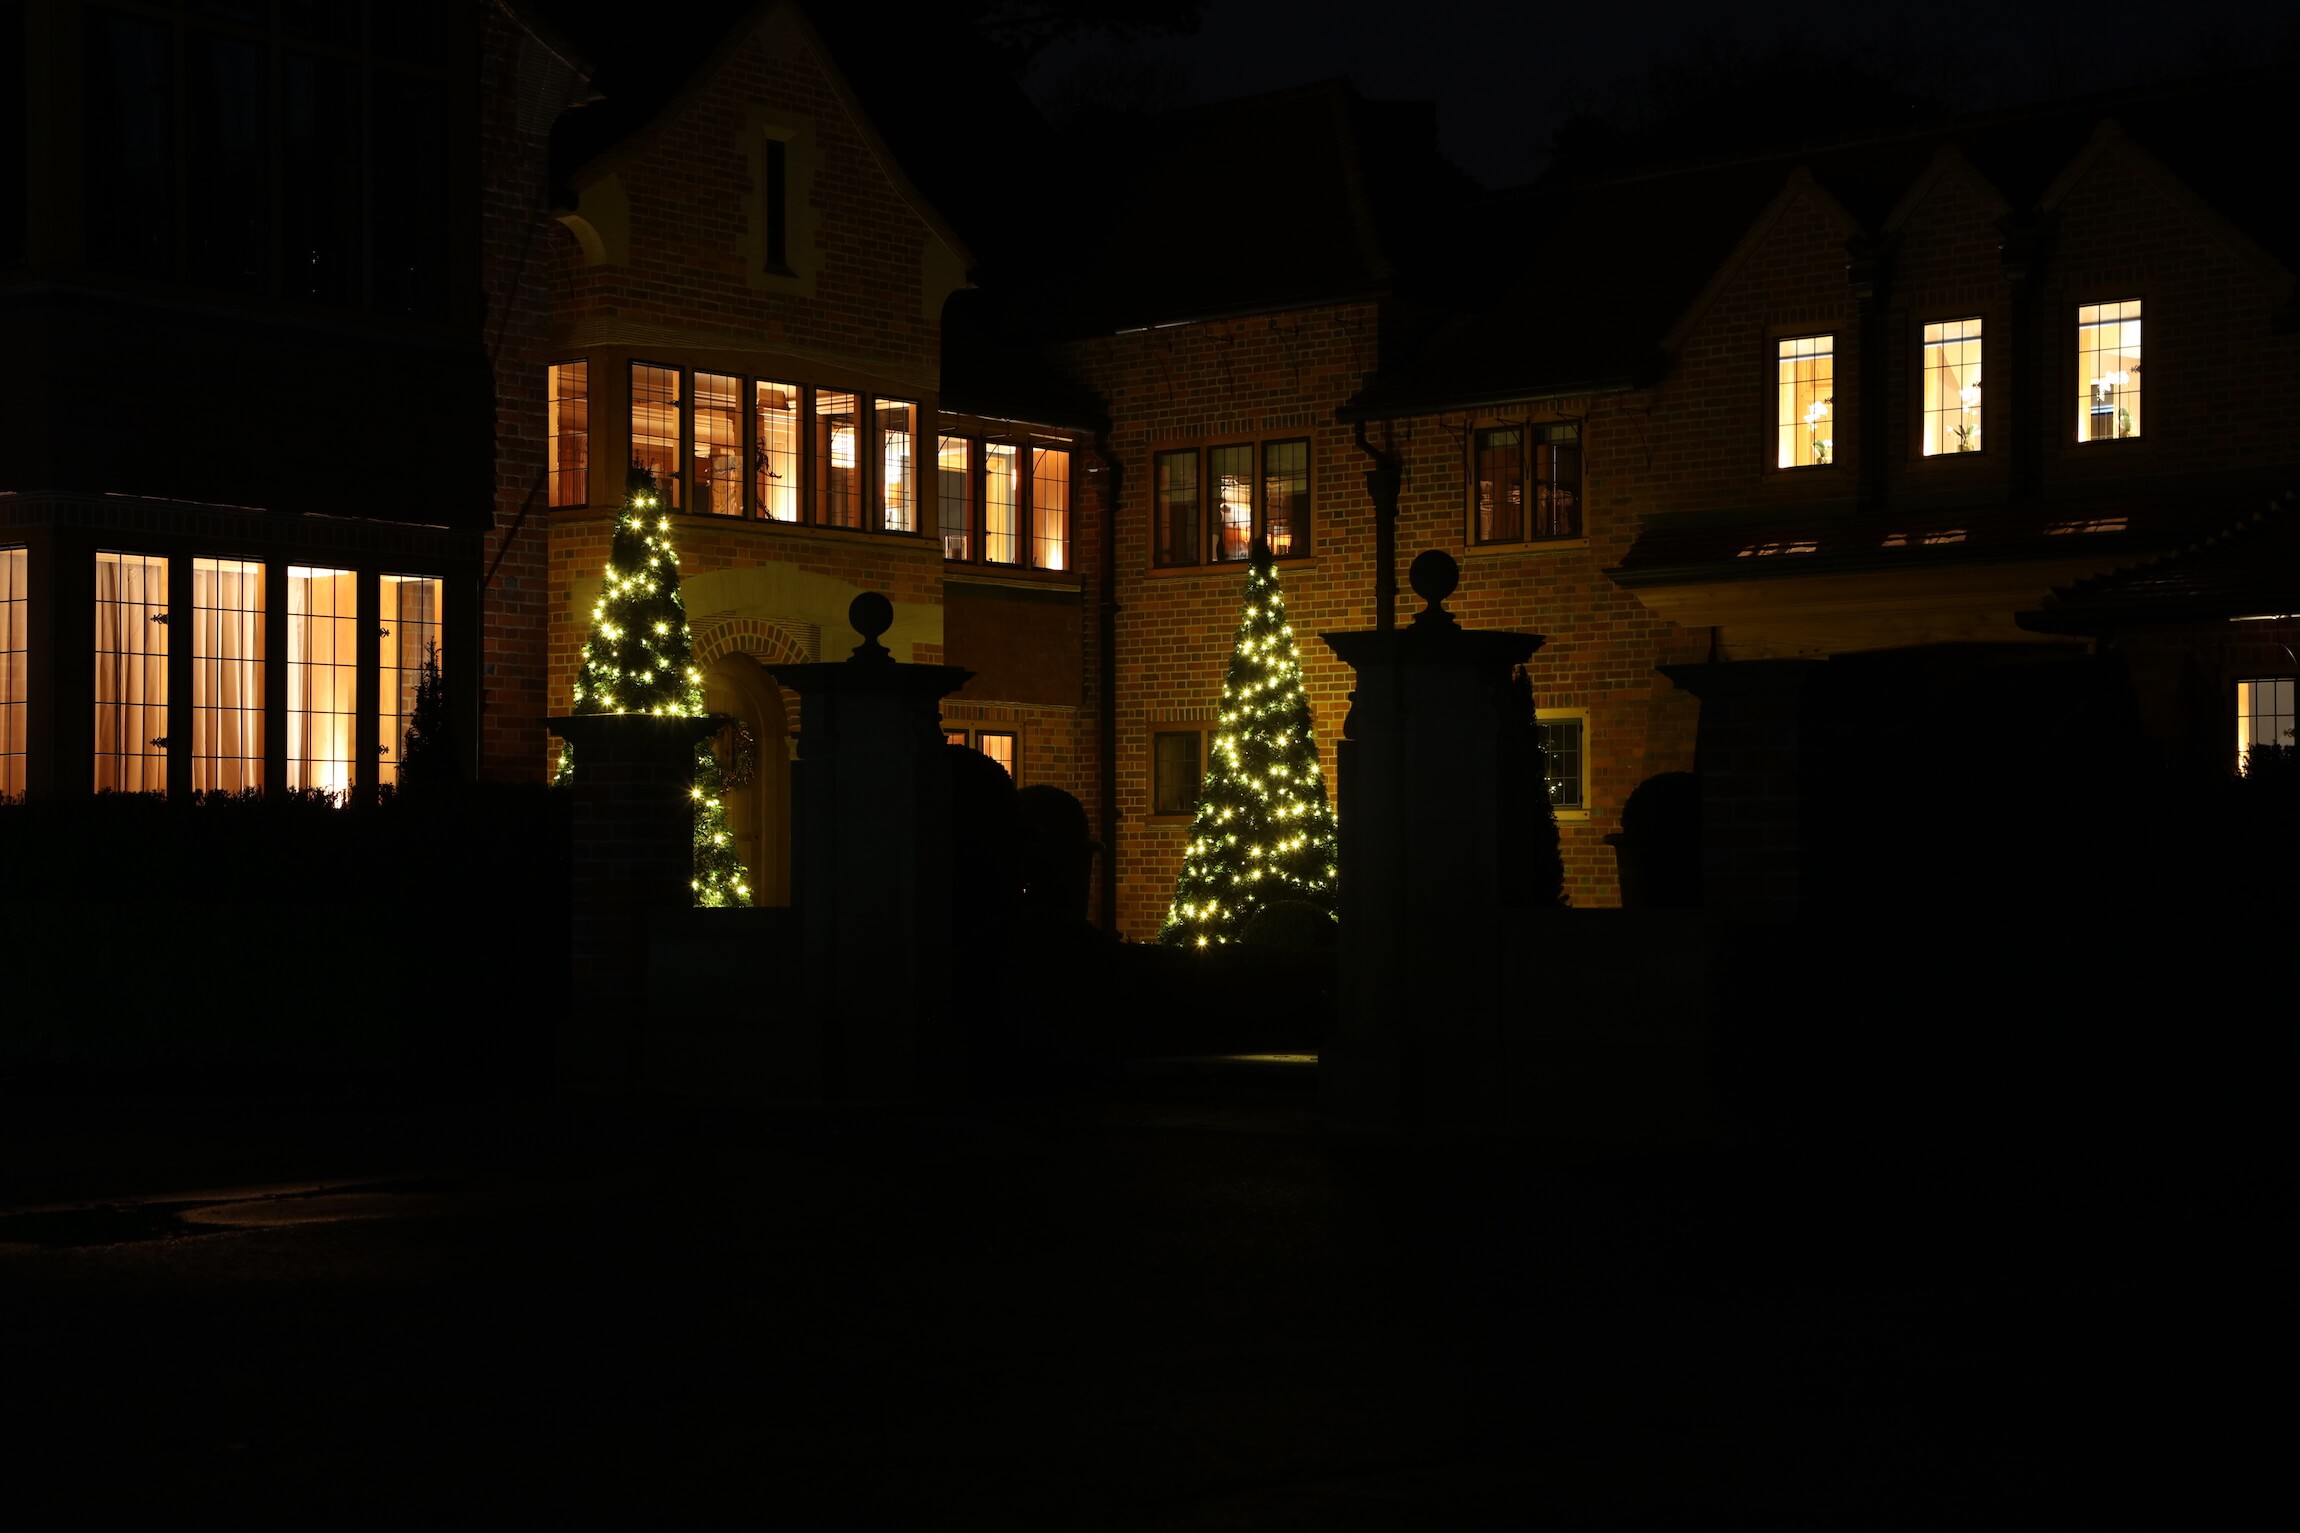 courtyard garden at night with Christmas lights